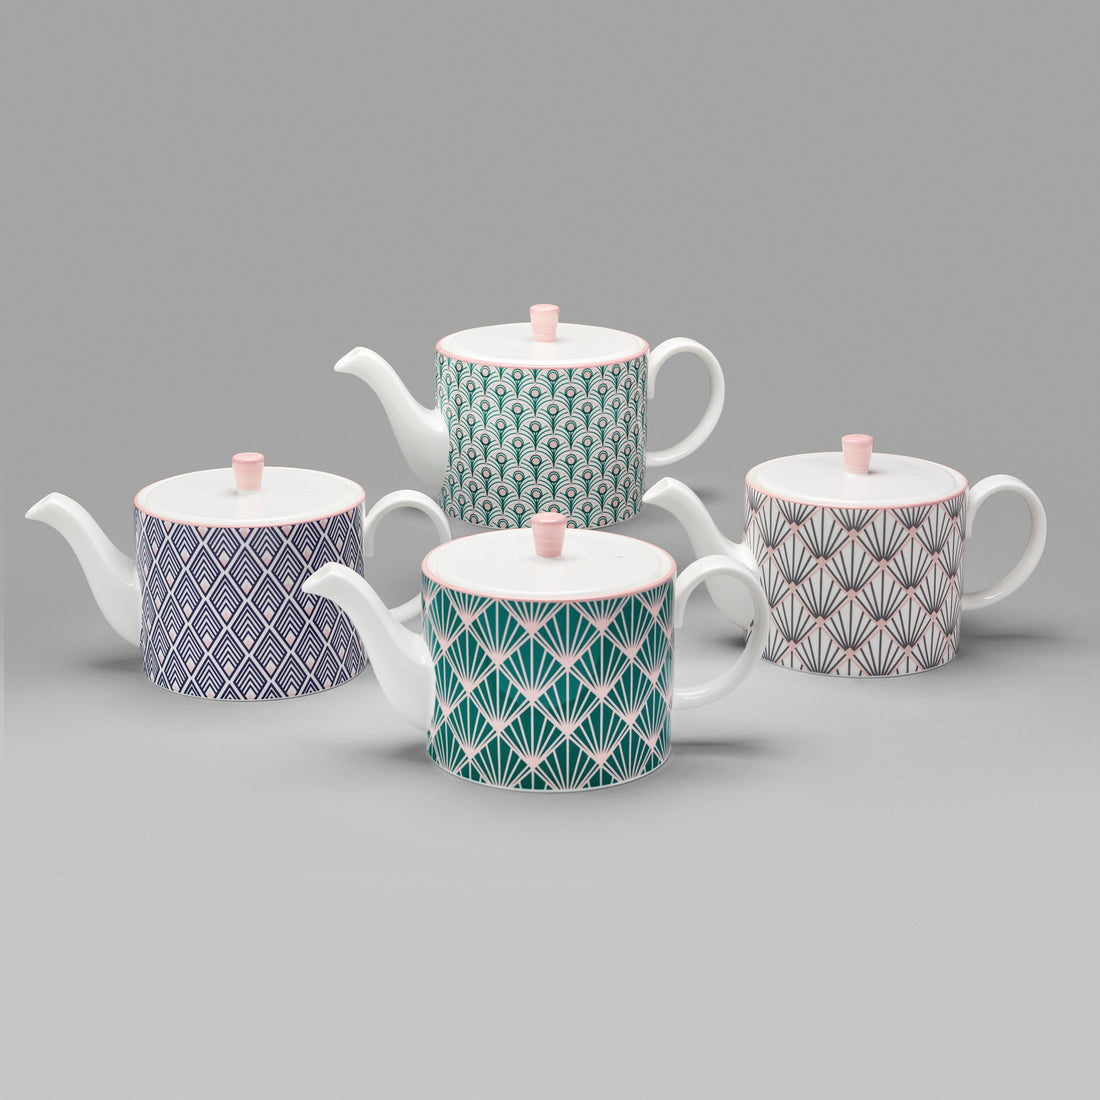 Peacock Teapot in Teal and Blush - 450ml